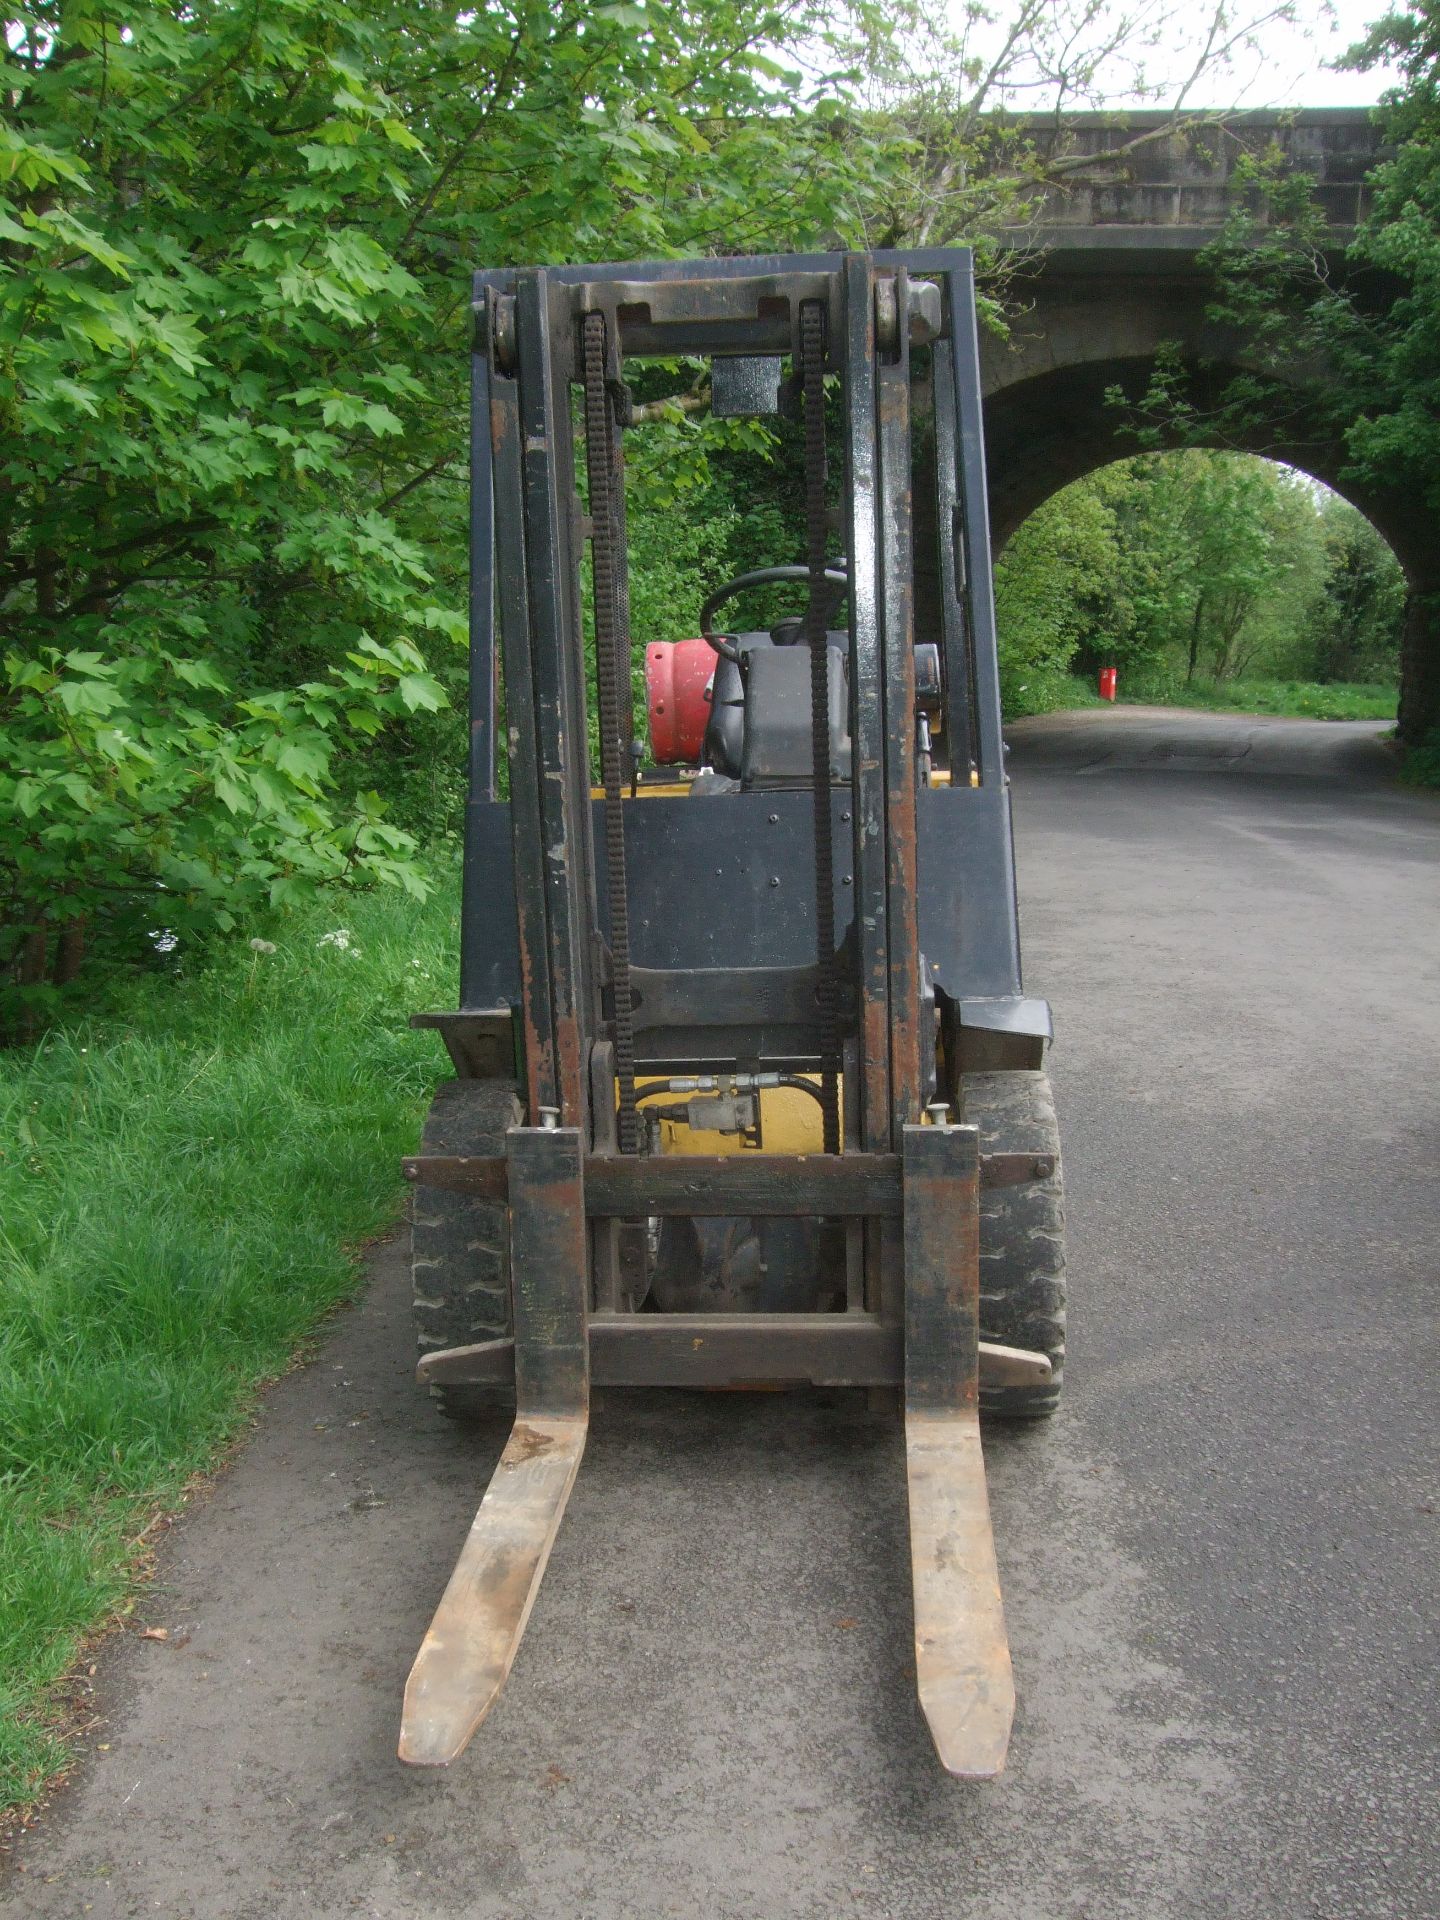 YALE GDP 25 GAS FORKLIFT - 2.5 TONNE CAPACITY - DUPLEX MAST - 13071 RECORDED HOURS - Image 4 of 4